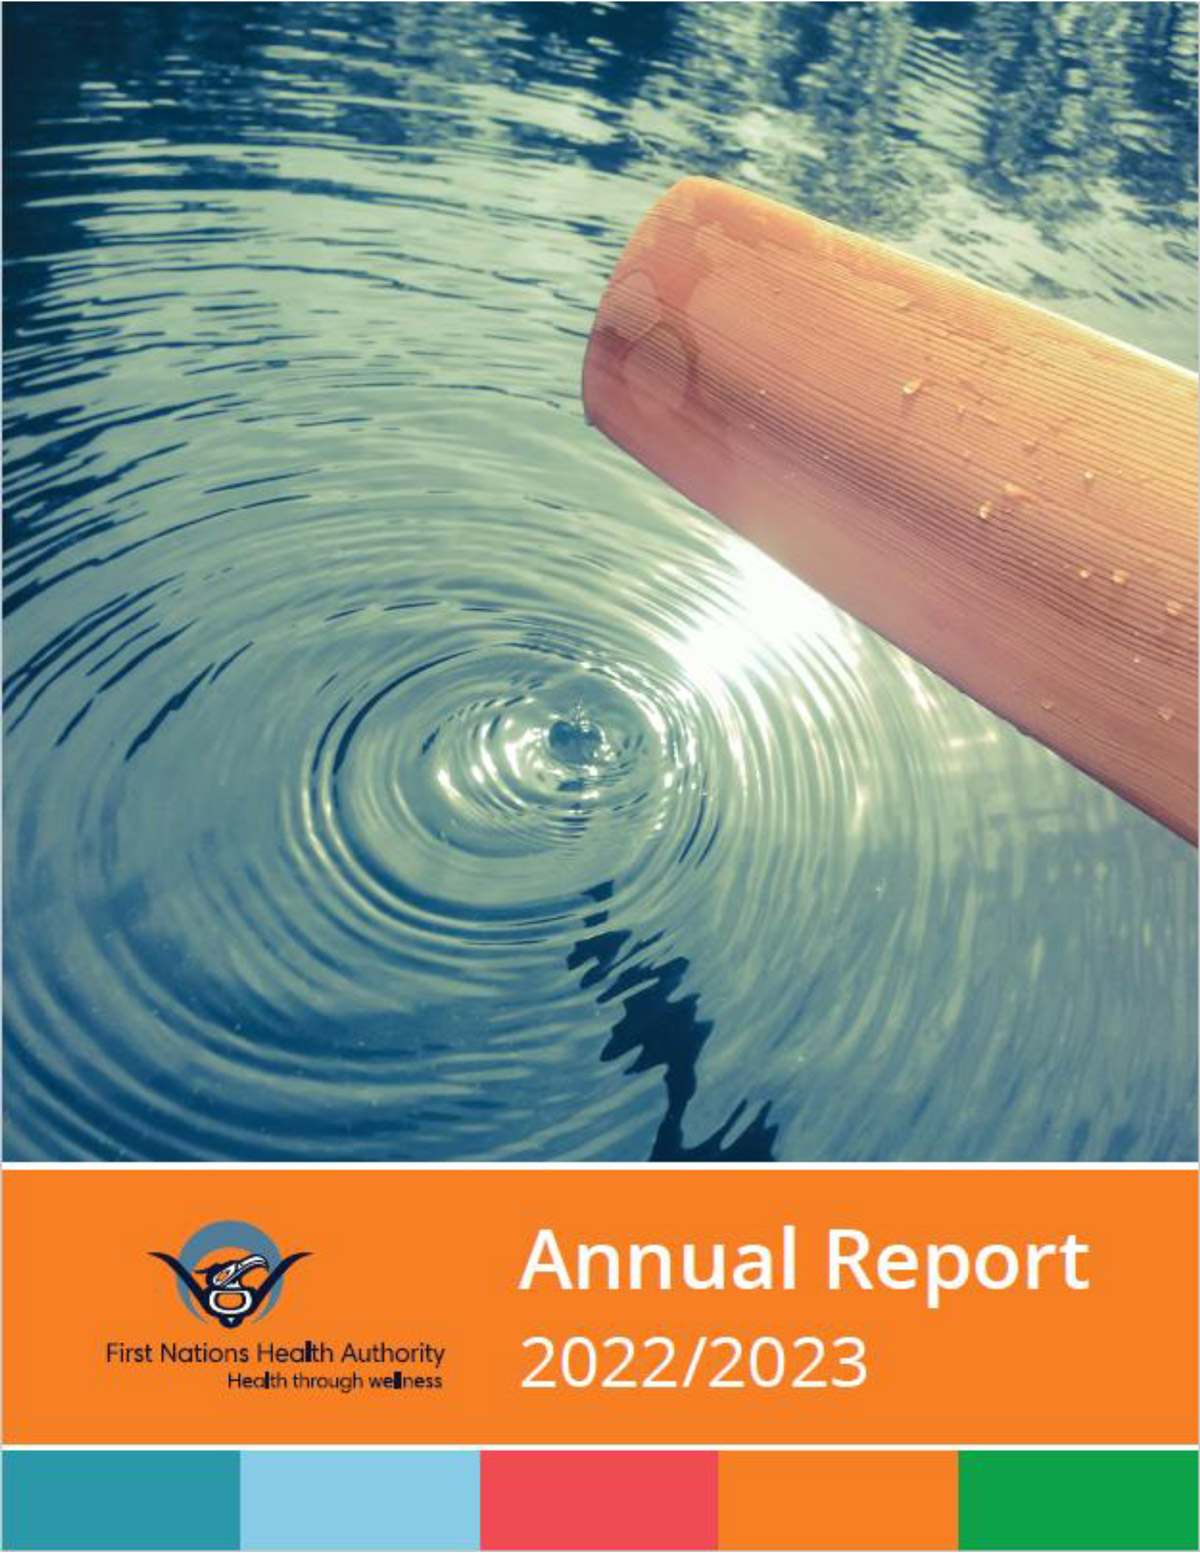 FNHA-Annual-Report-2022-2023-Cover.jpg